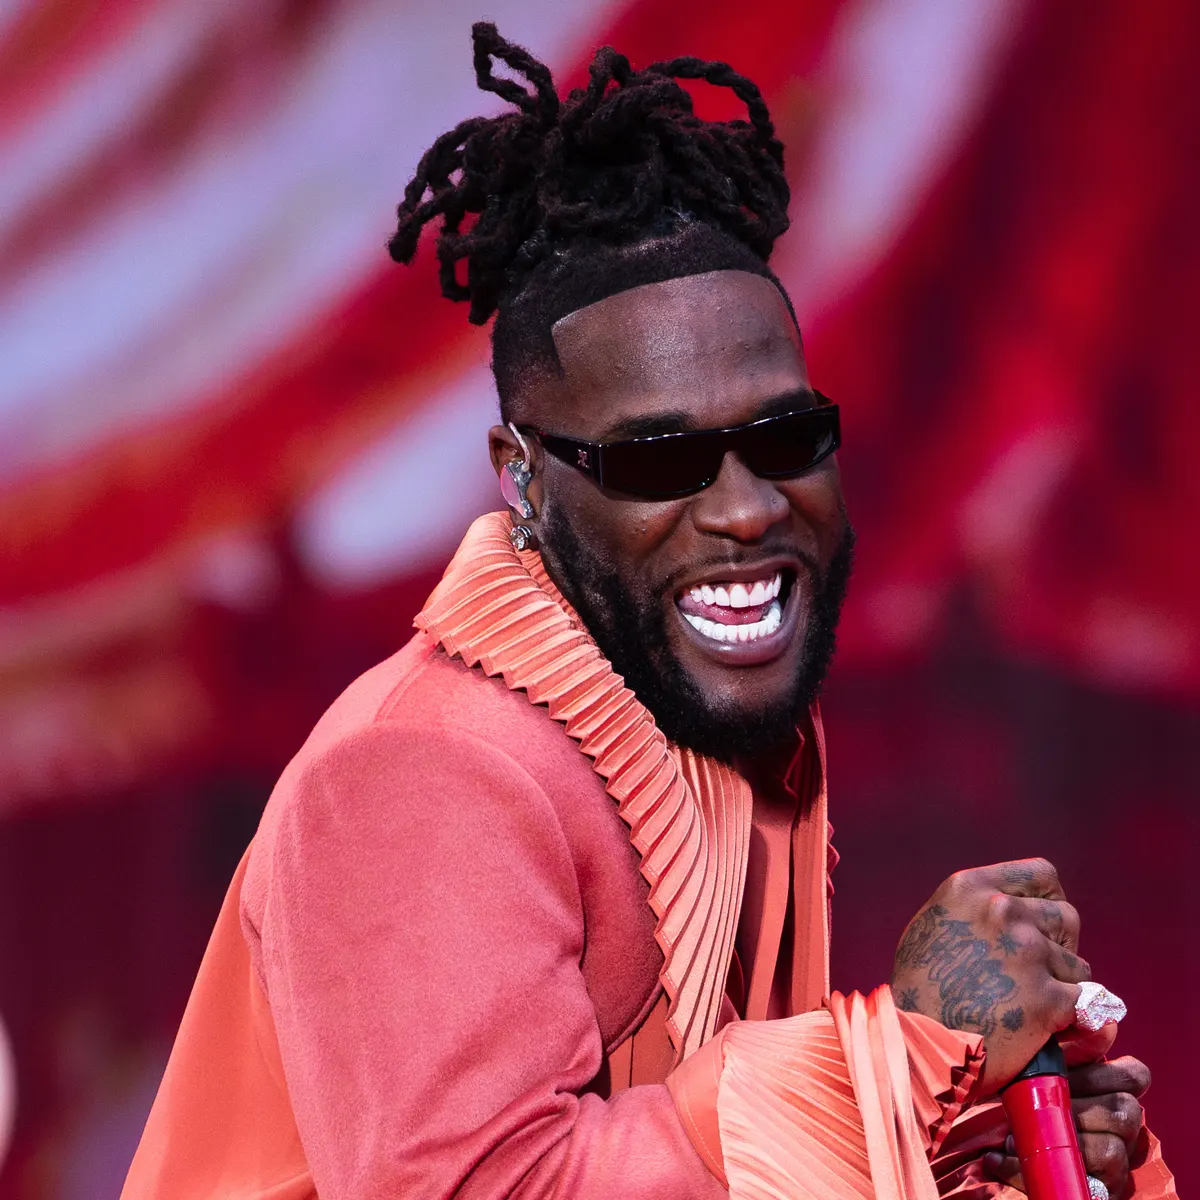 Burna Boy Did Not Cover Medical Bills for All Patients - UPTH Clarifies ...